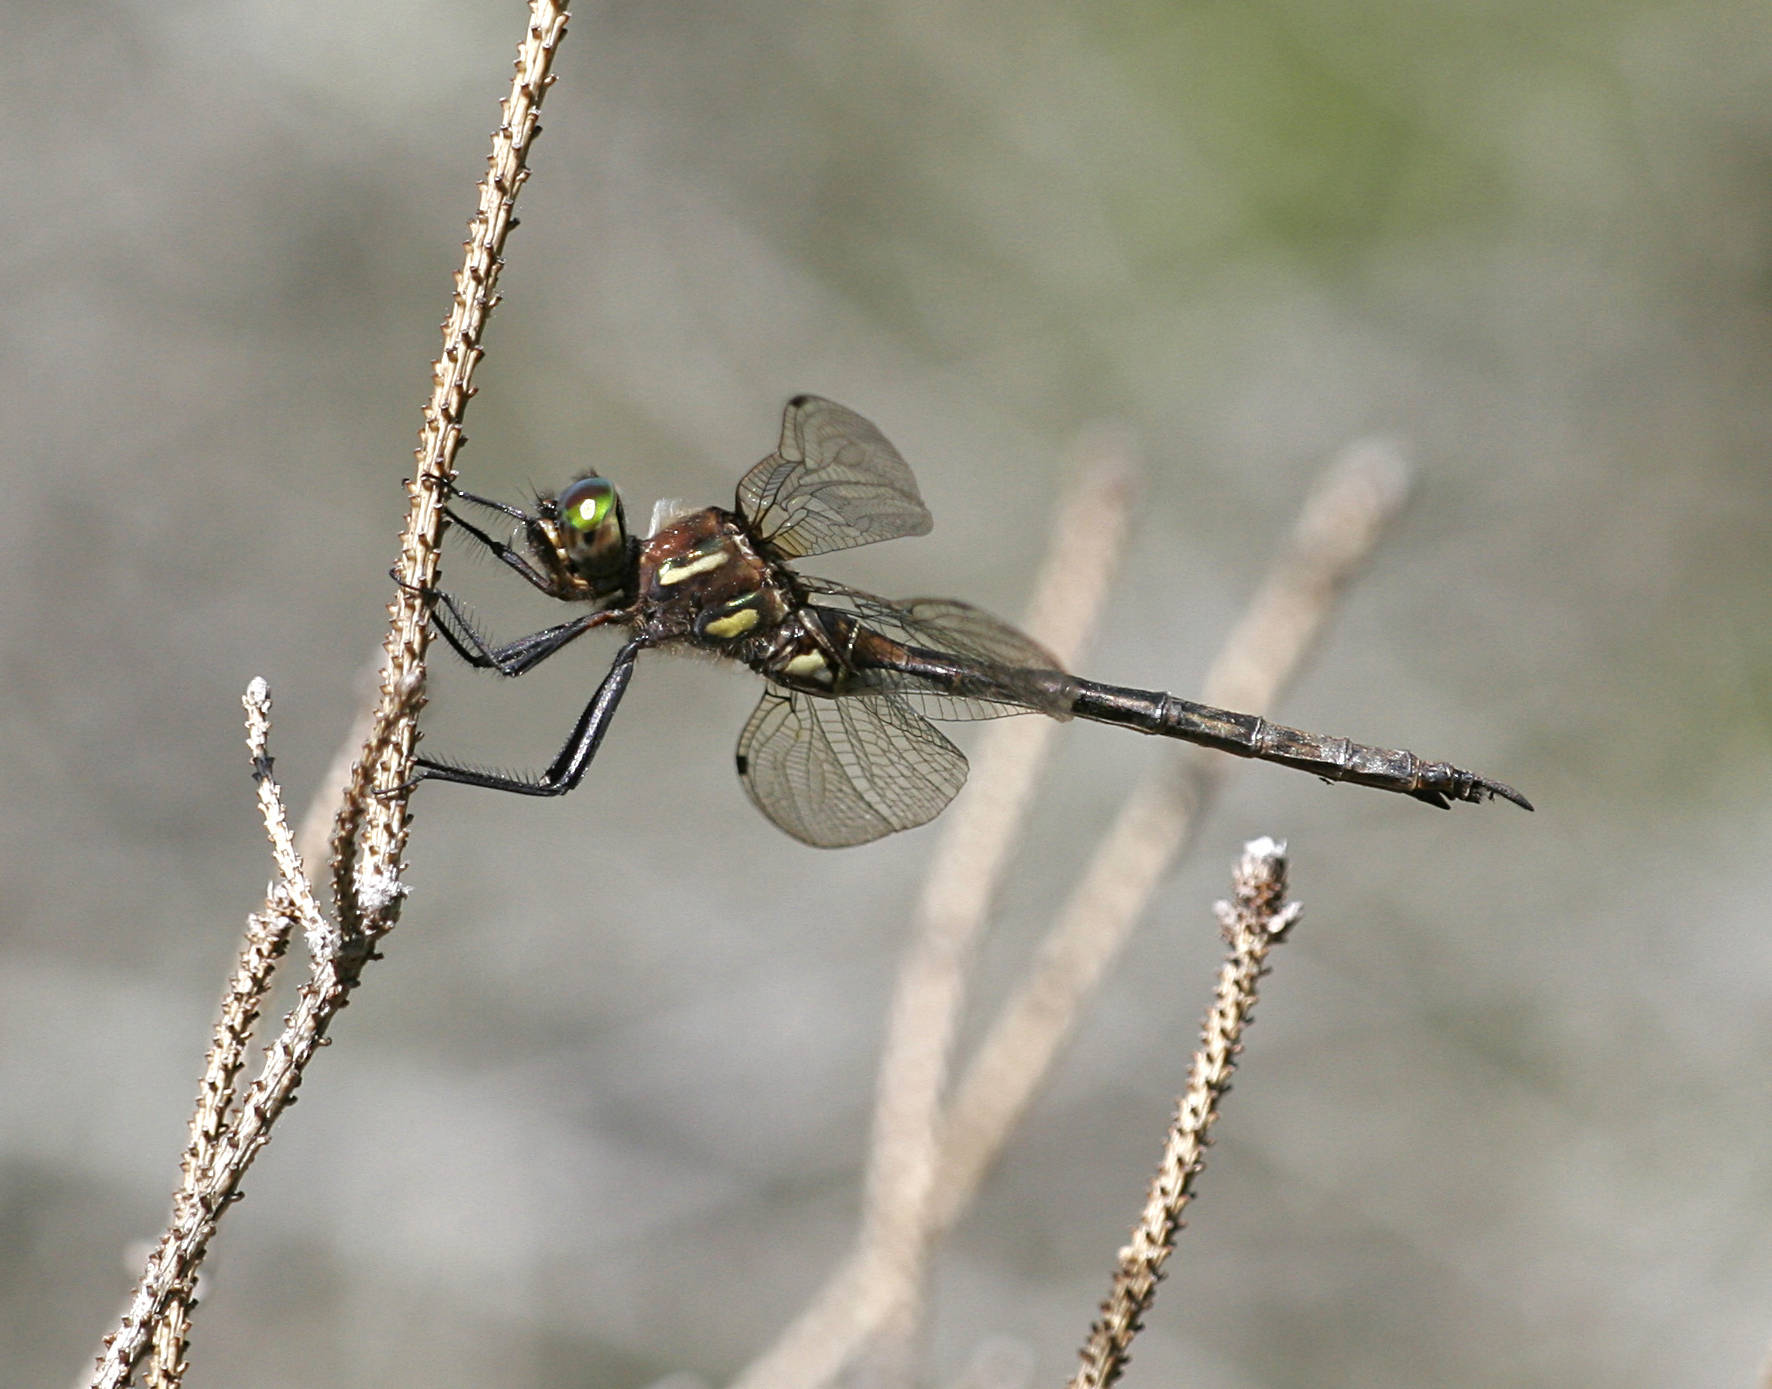 A brownish dragonfly holds on to a bare twig.